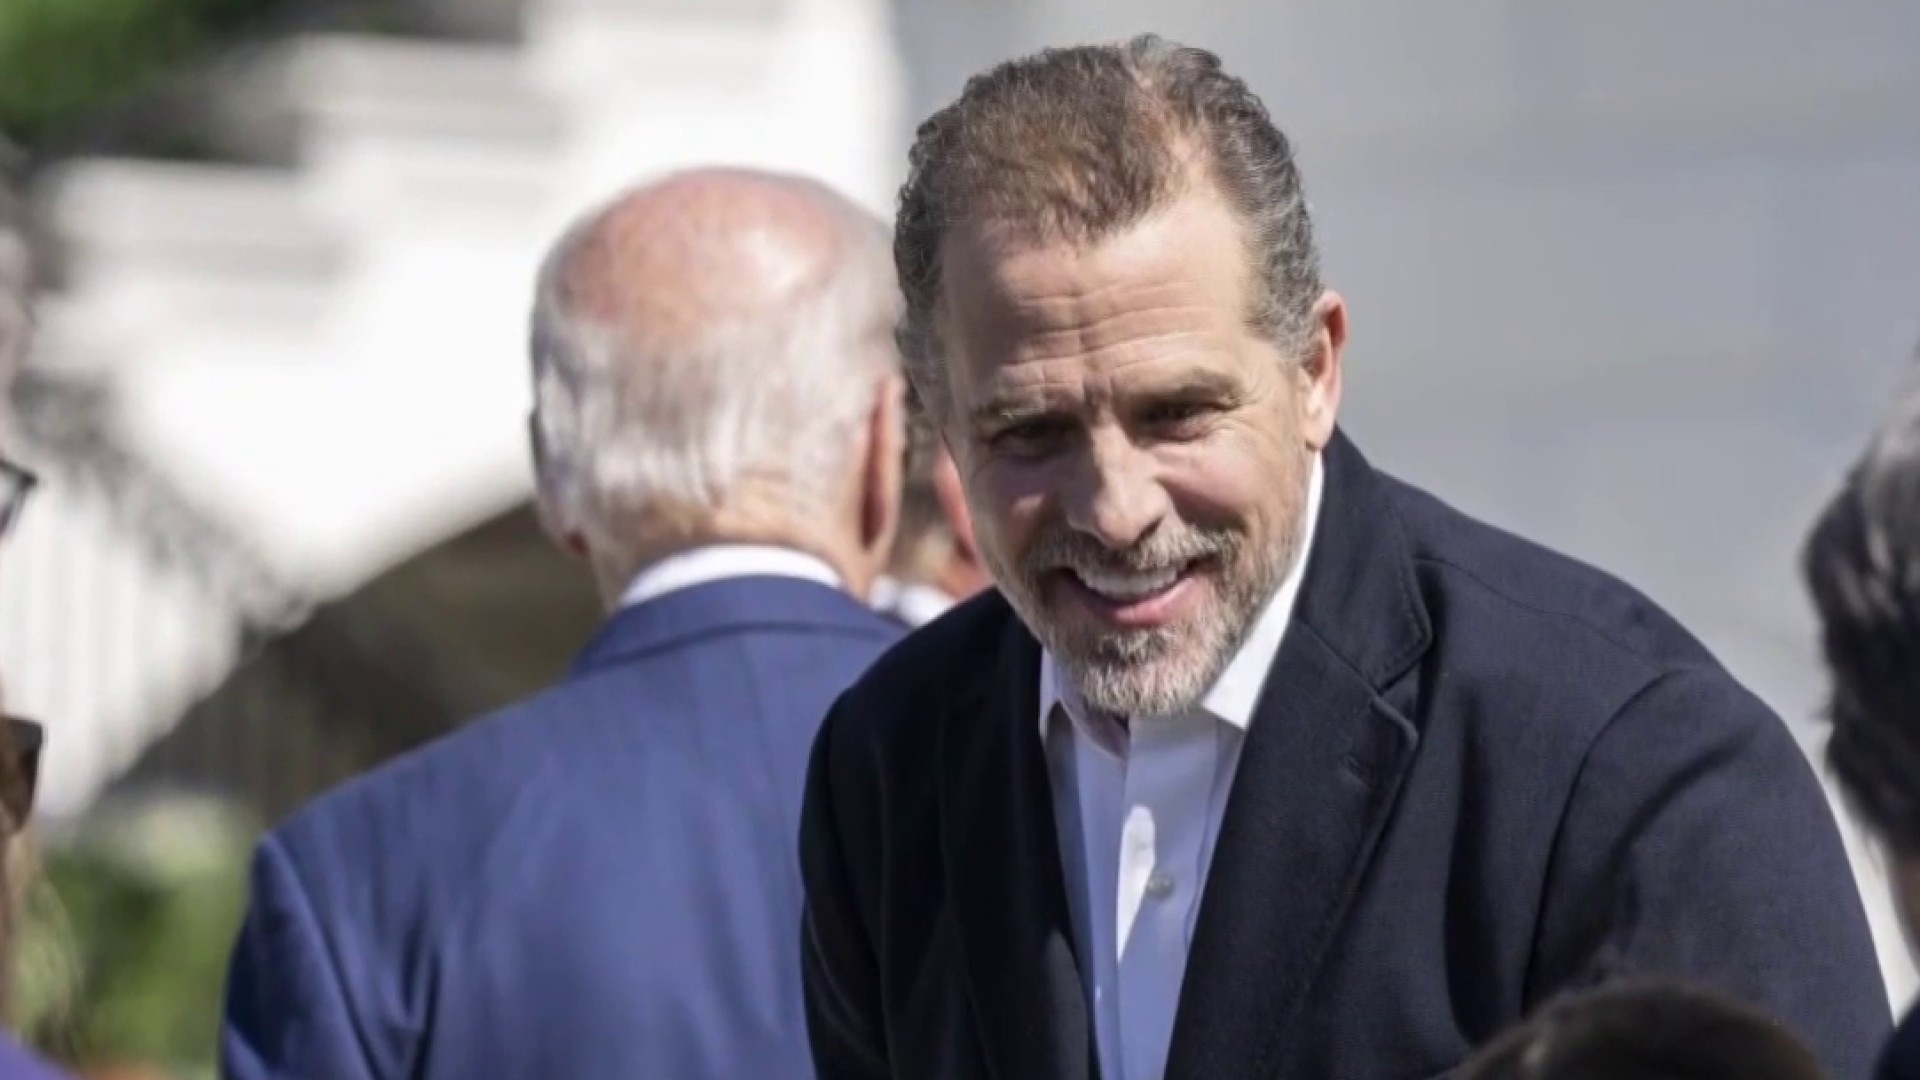 Analyzing the political impact of Hunter Biden's indictment